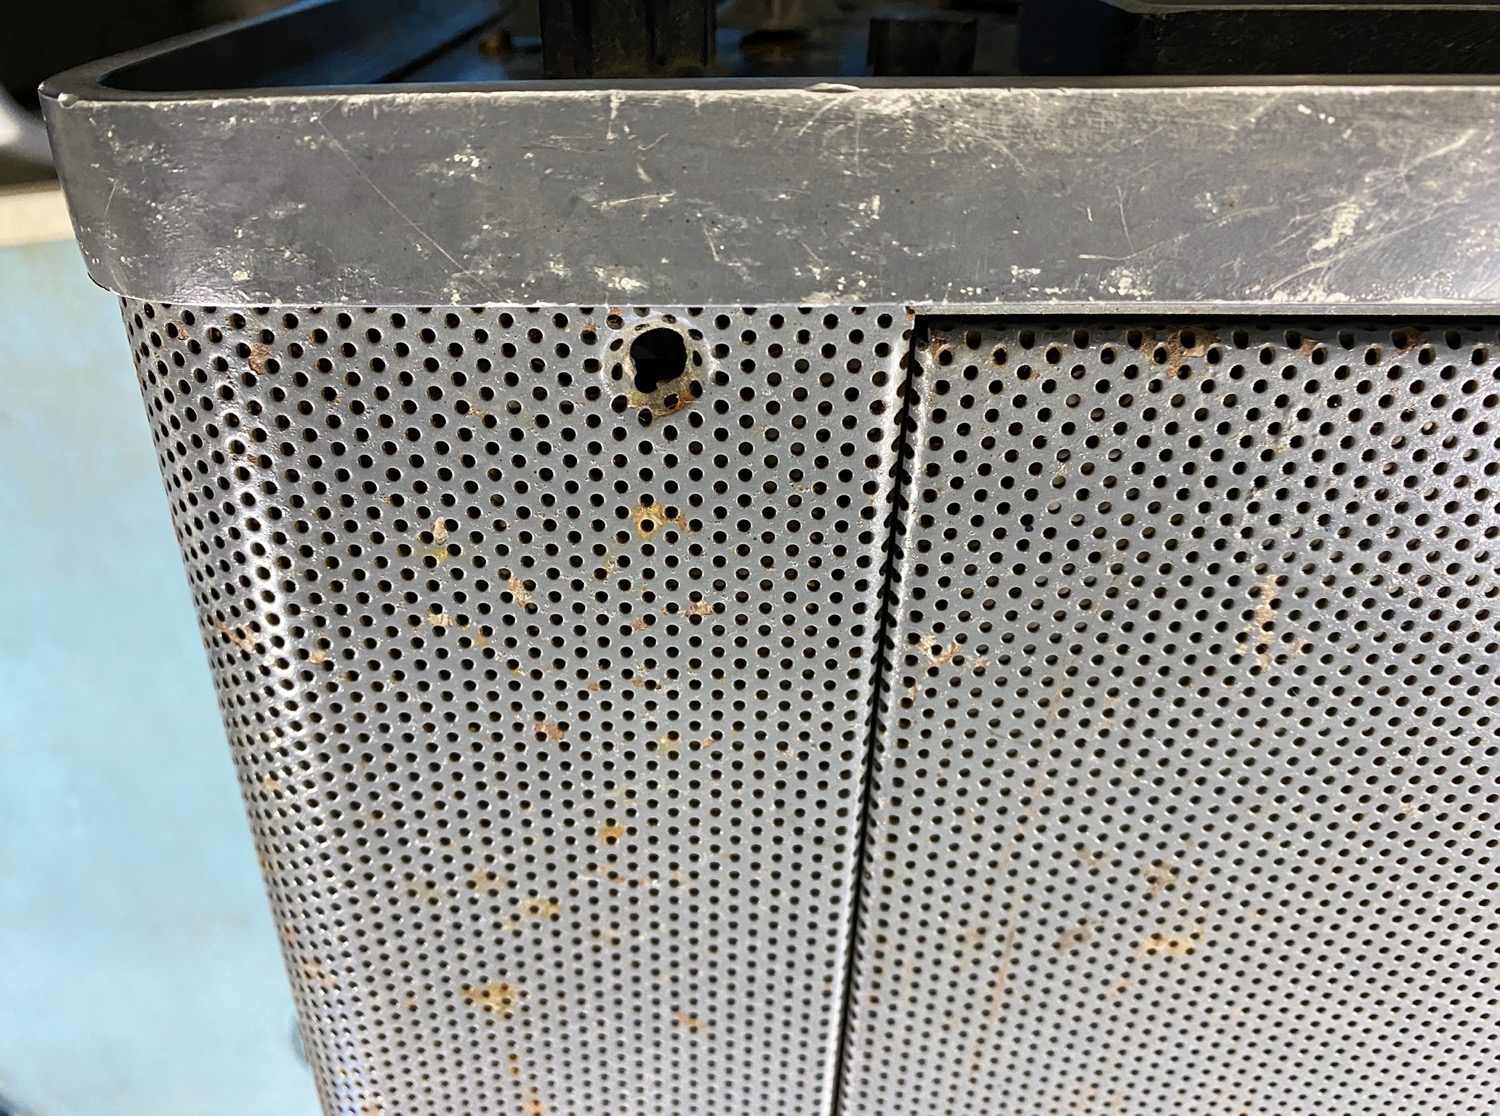 Either side of the lid opening are holes where something was possibly installed to.